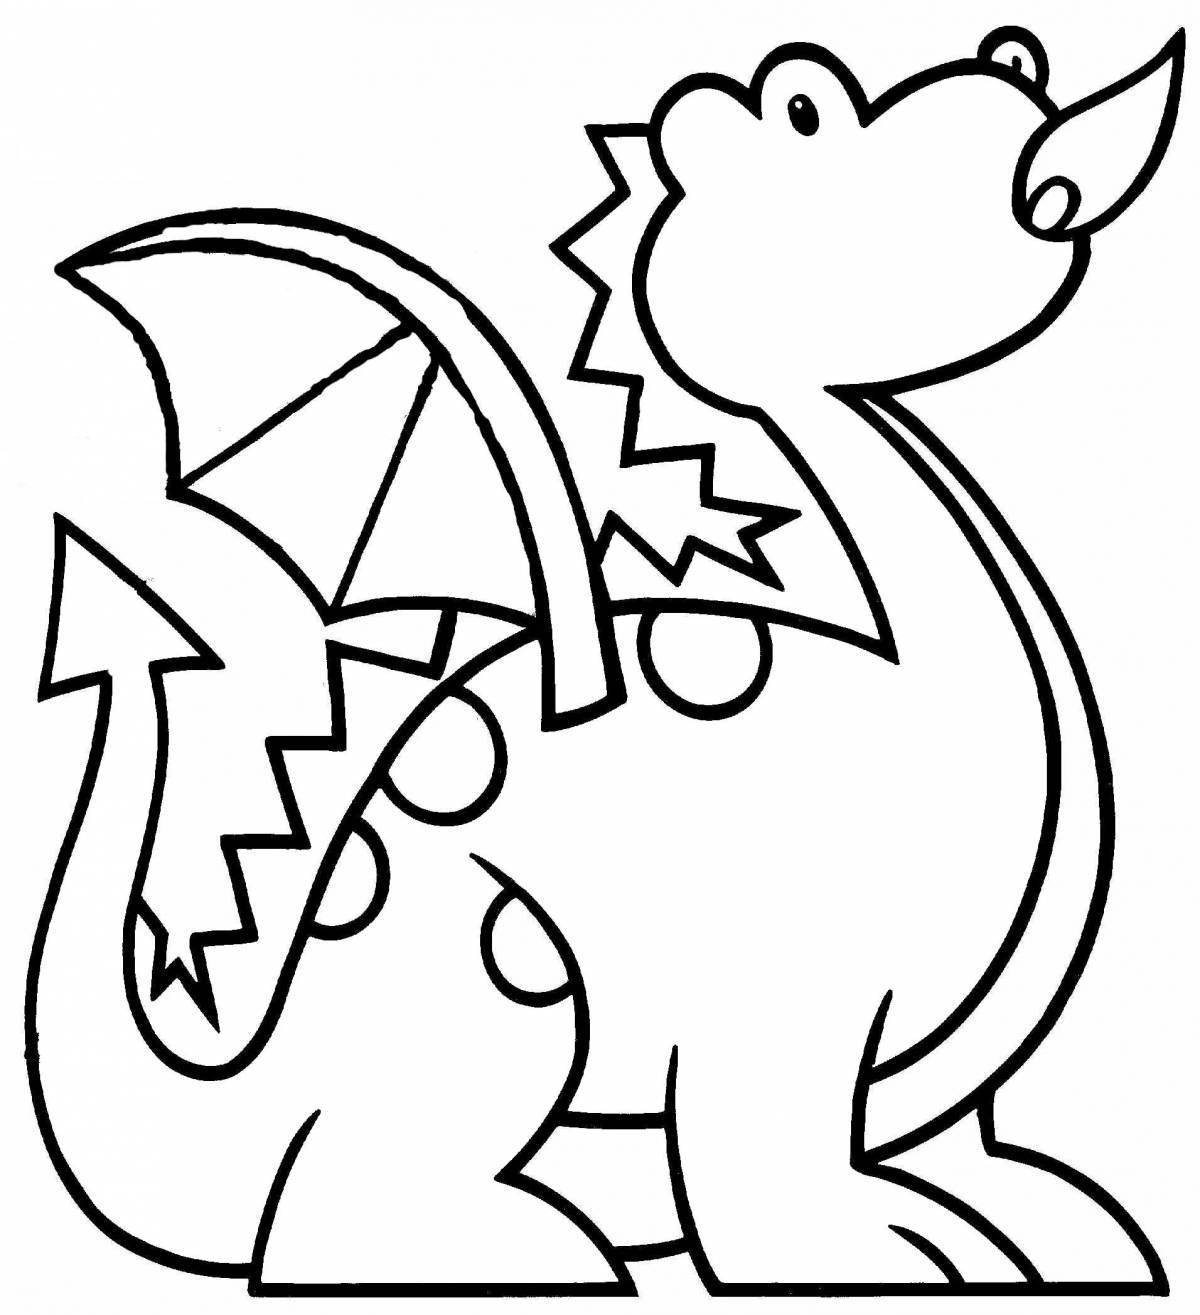 Fancy coloring dragons for kids